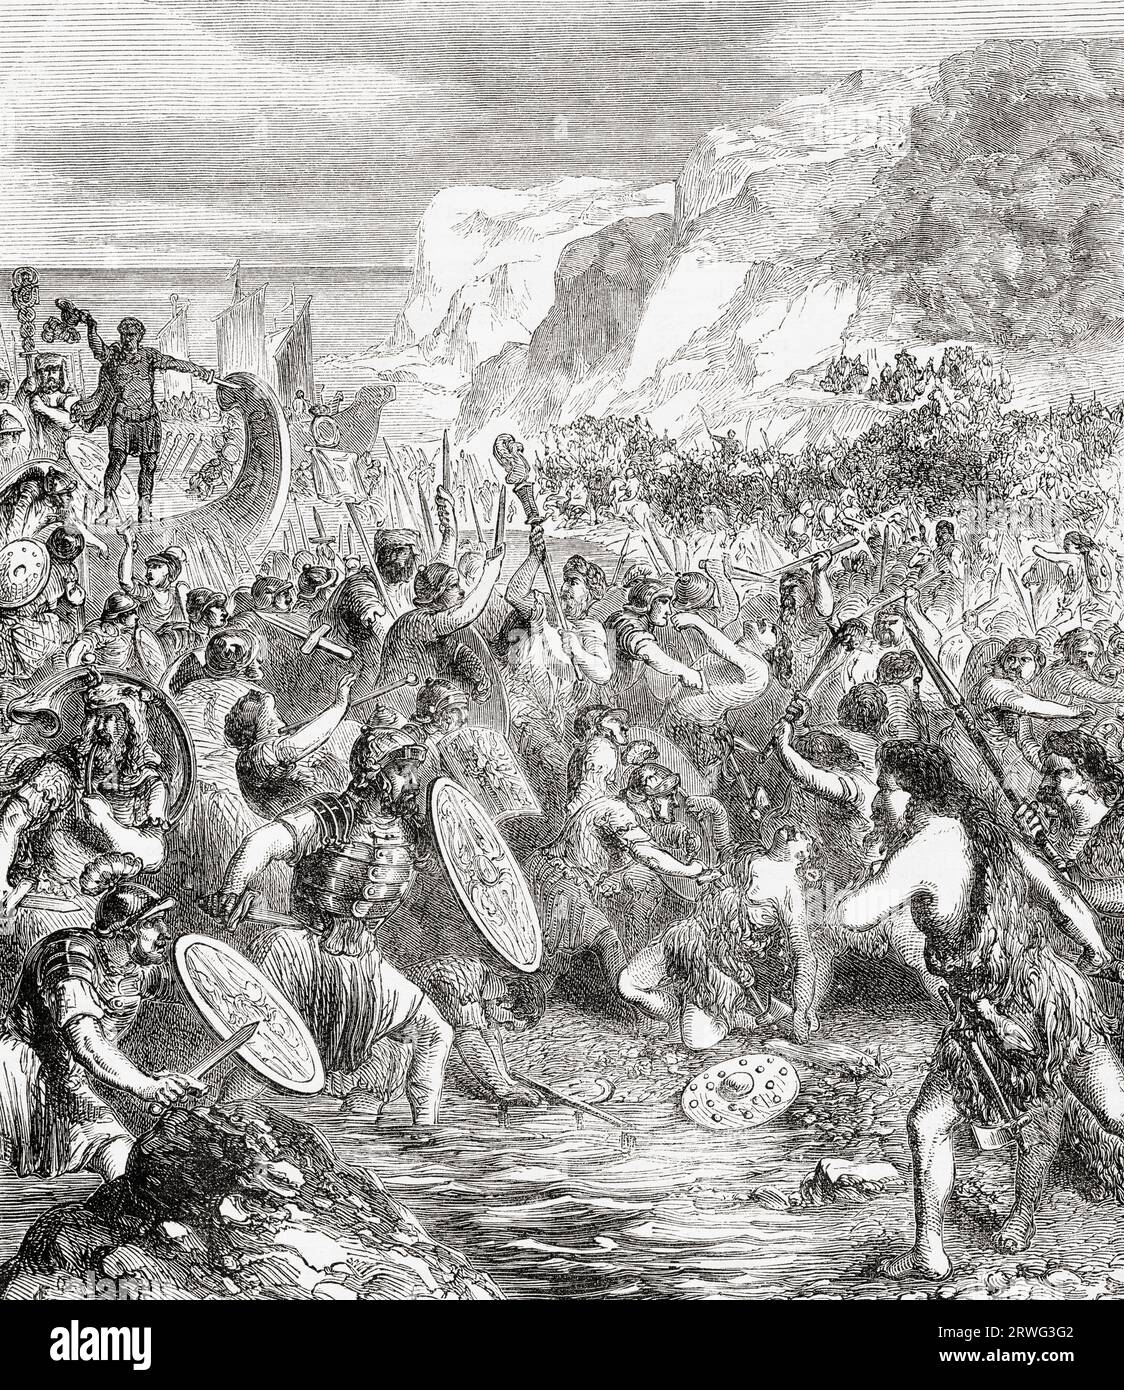 The landing of Julius Caesar in Great Britain, 55/54BC.  From Cassell's Illustrated History of England, published 1857. Stock Photo